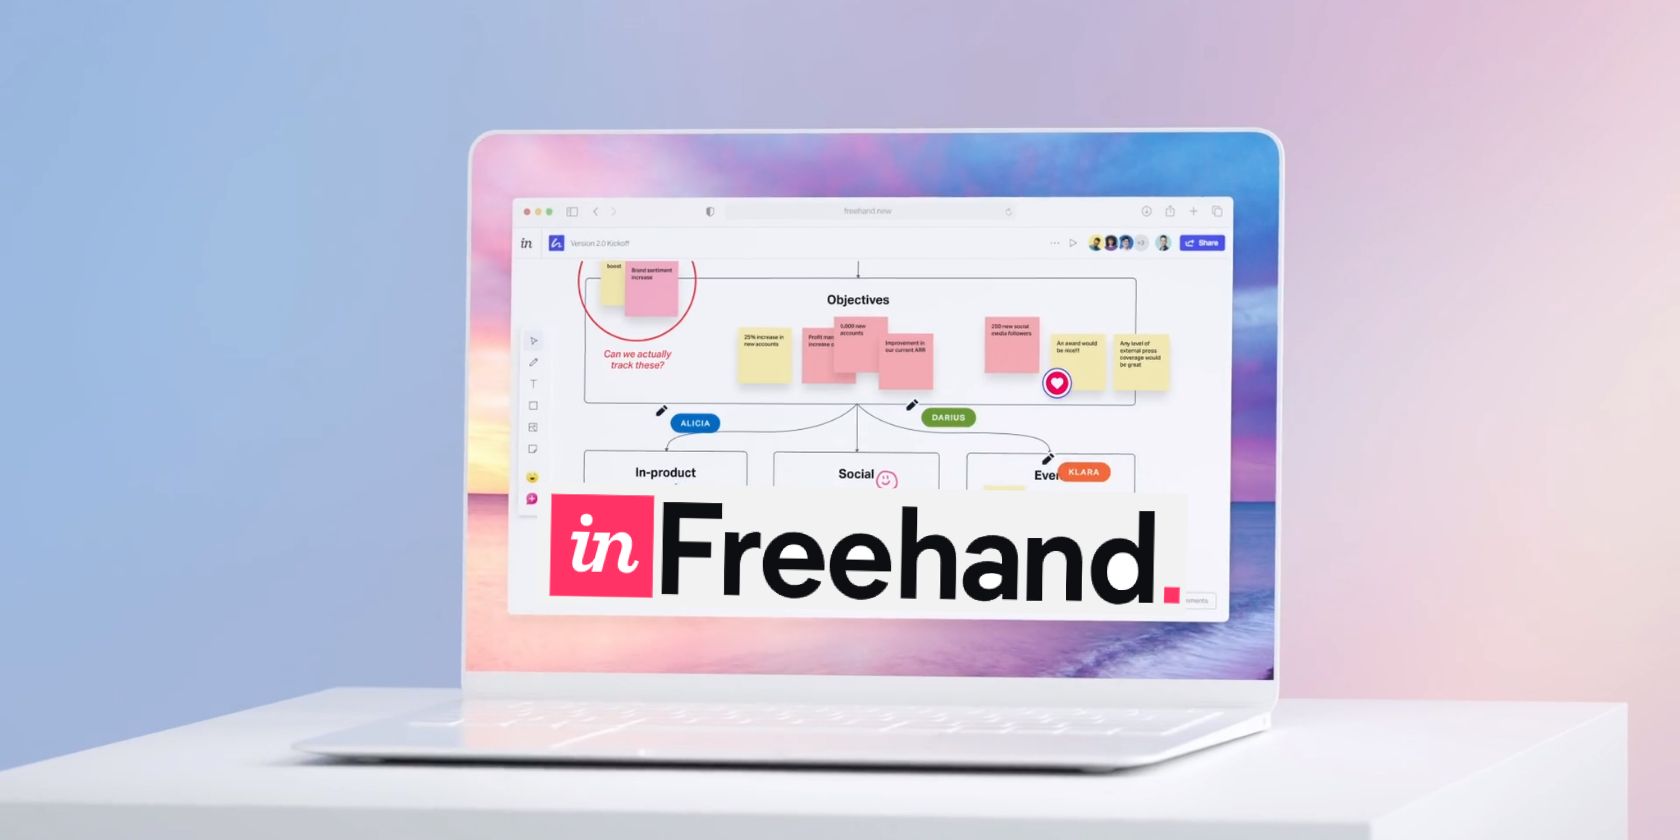 Illustration of the Freehand app interface in a laptop